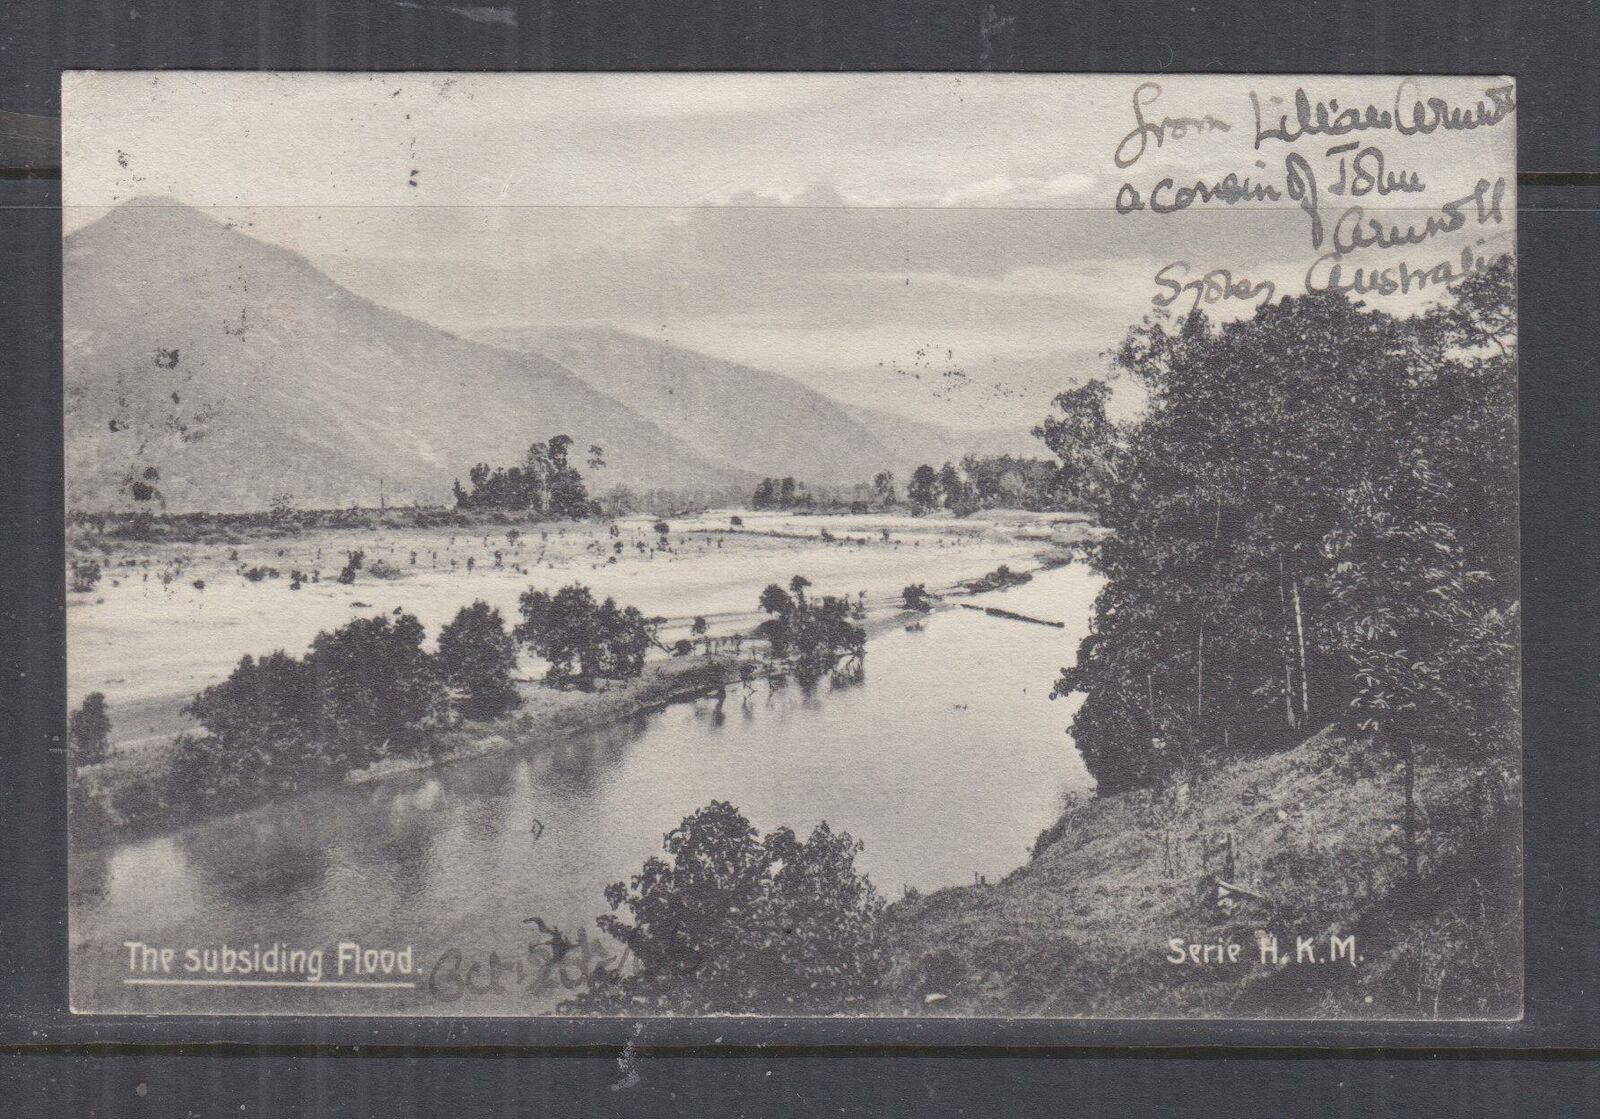 NEW SOUTH WALES, 1906 ppc. The Subsiding Flood, 1d. Sydney to GB.